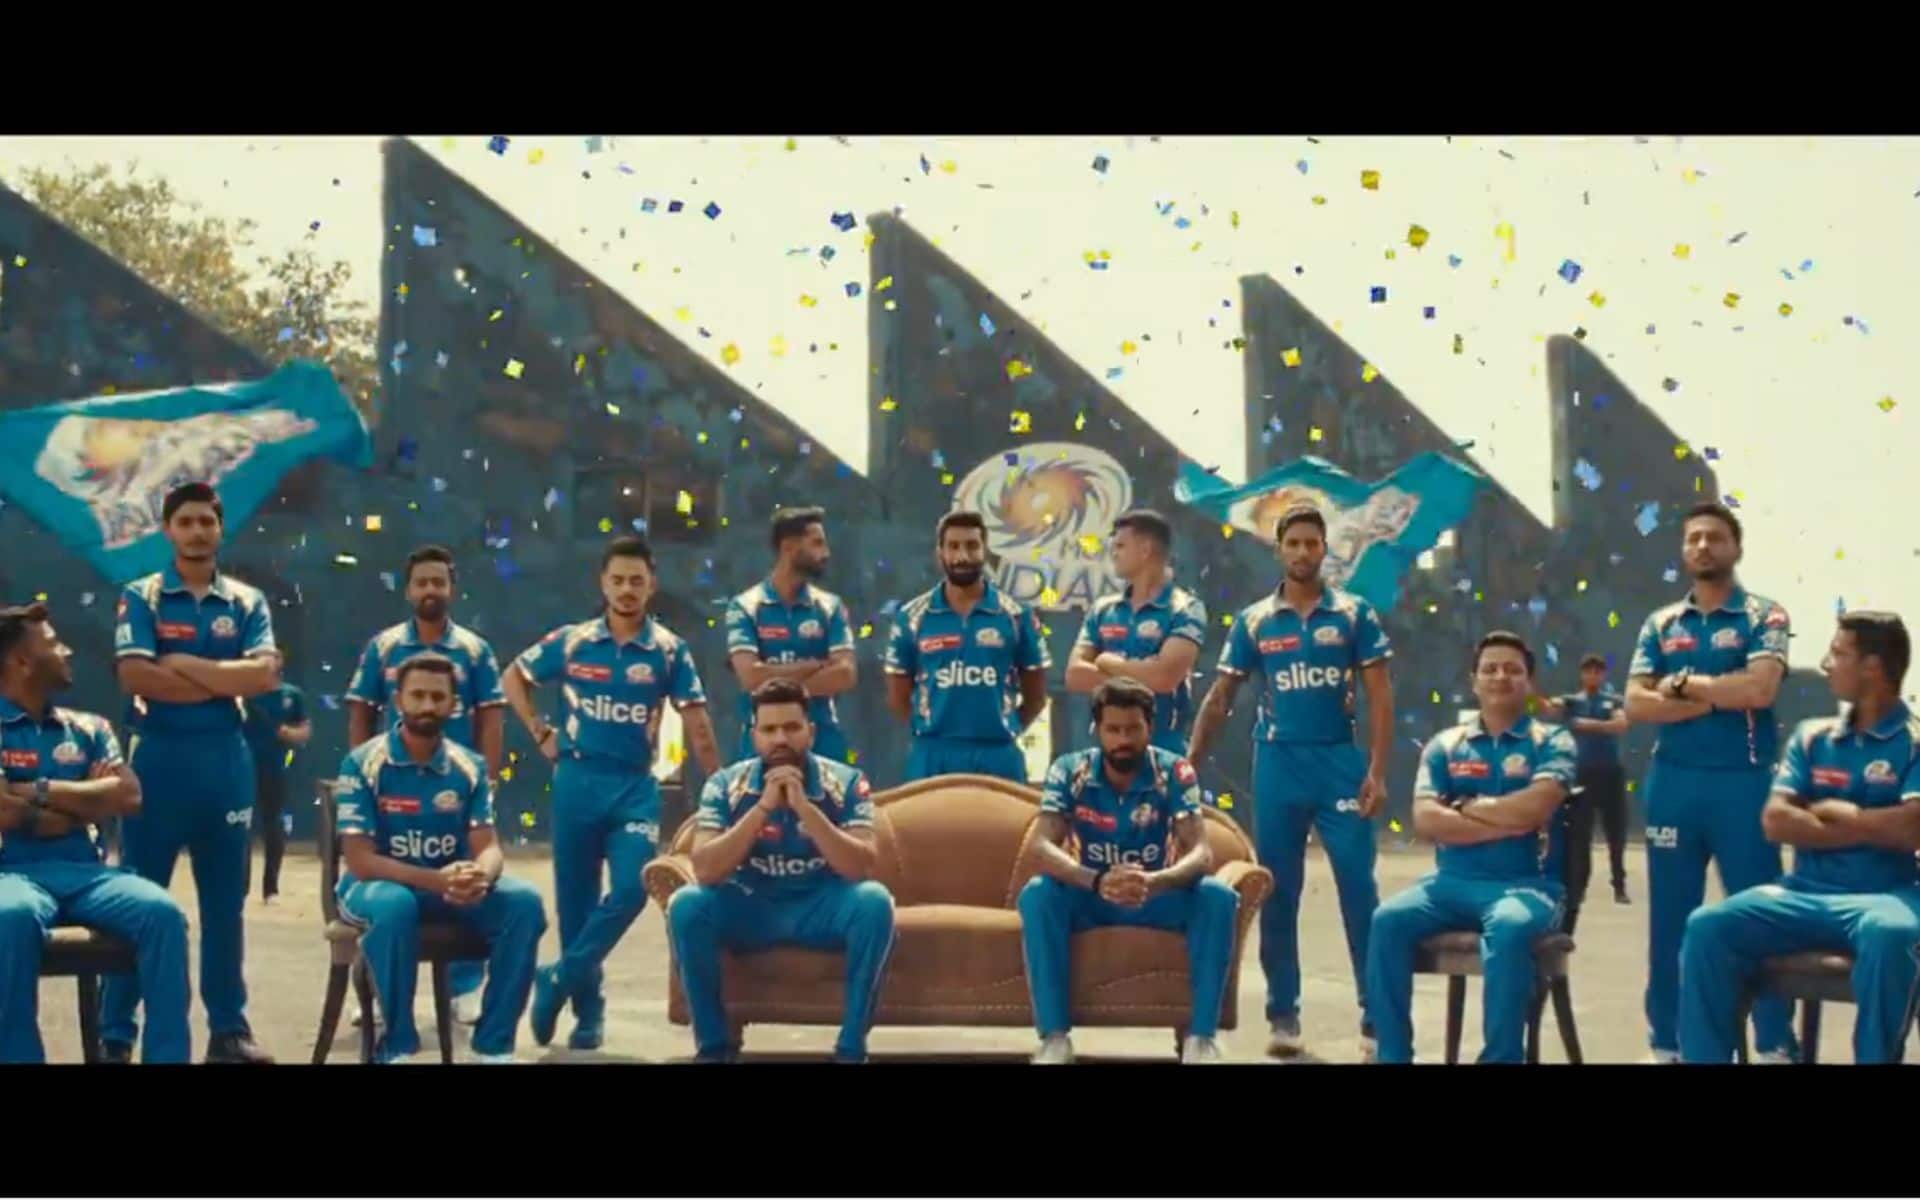 Rohit Sharma & Hardik Pandya featured together in MI's new theme song